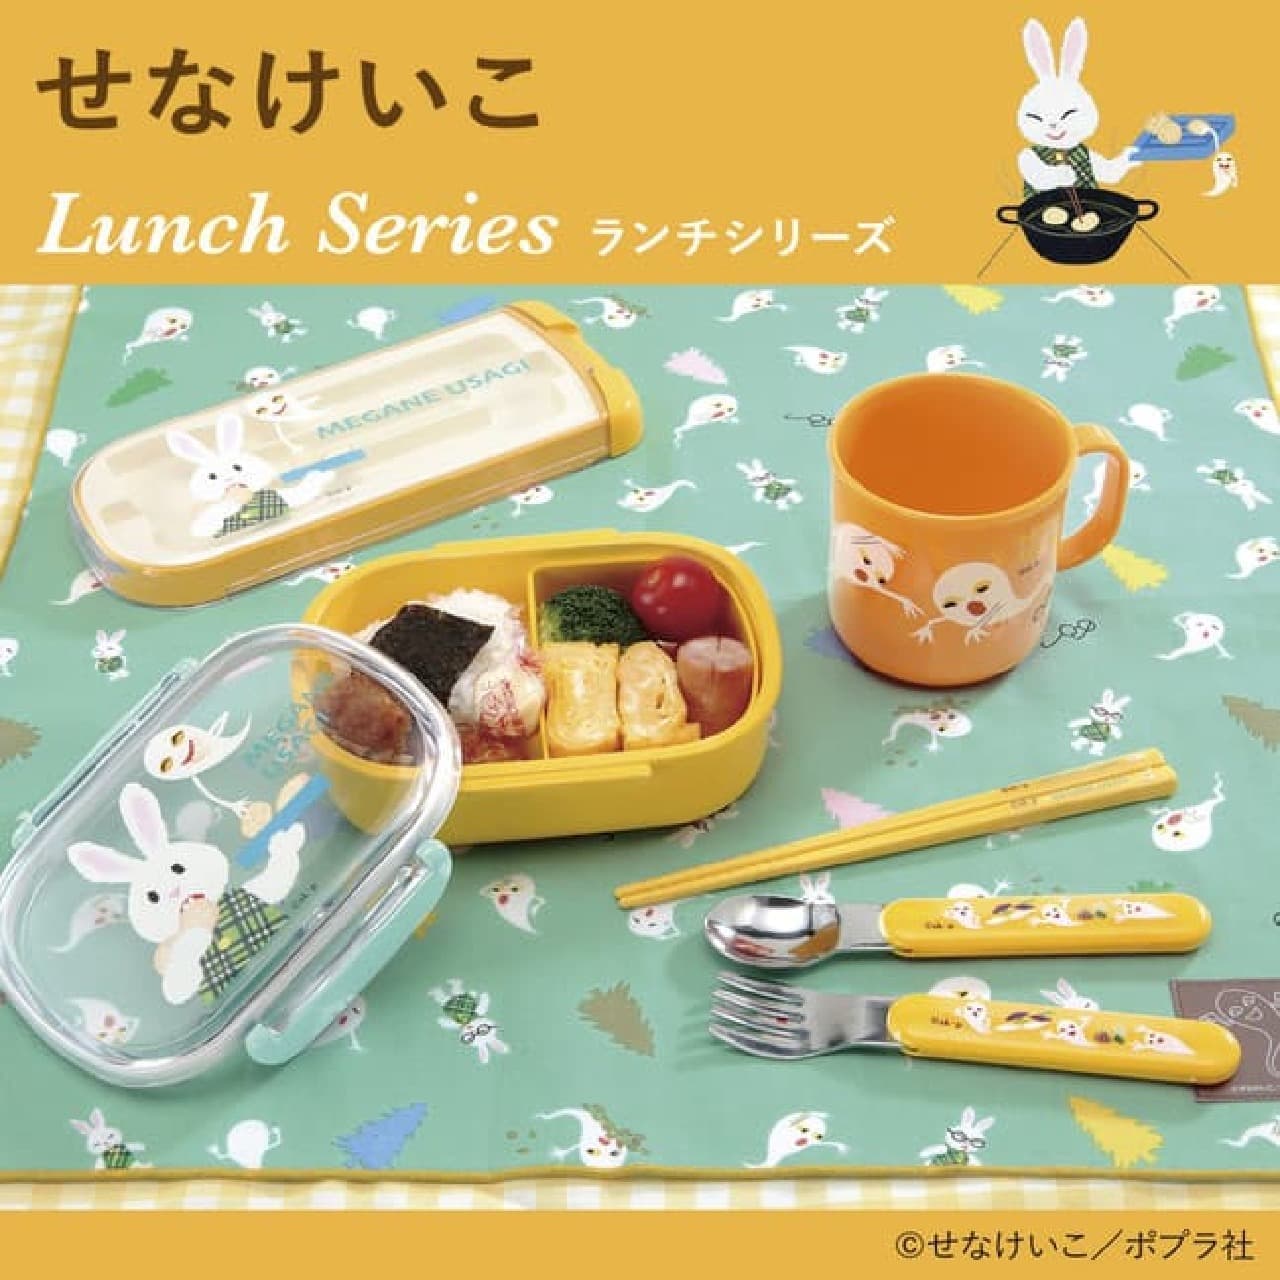 Keiko Sena's popular works are now available as lunchware! The "Megane Usagi" and "Ghostly Tempura" lunchboxes, drawers, etc.